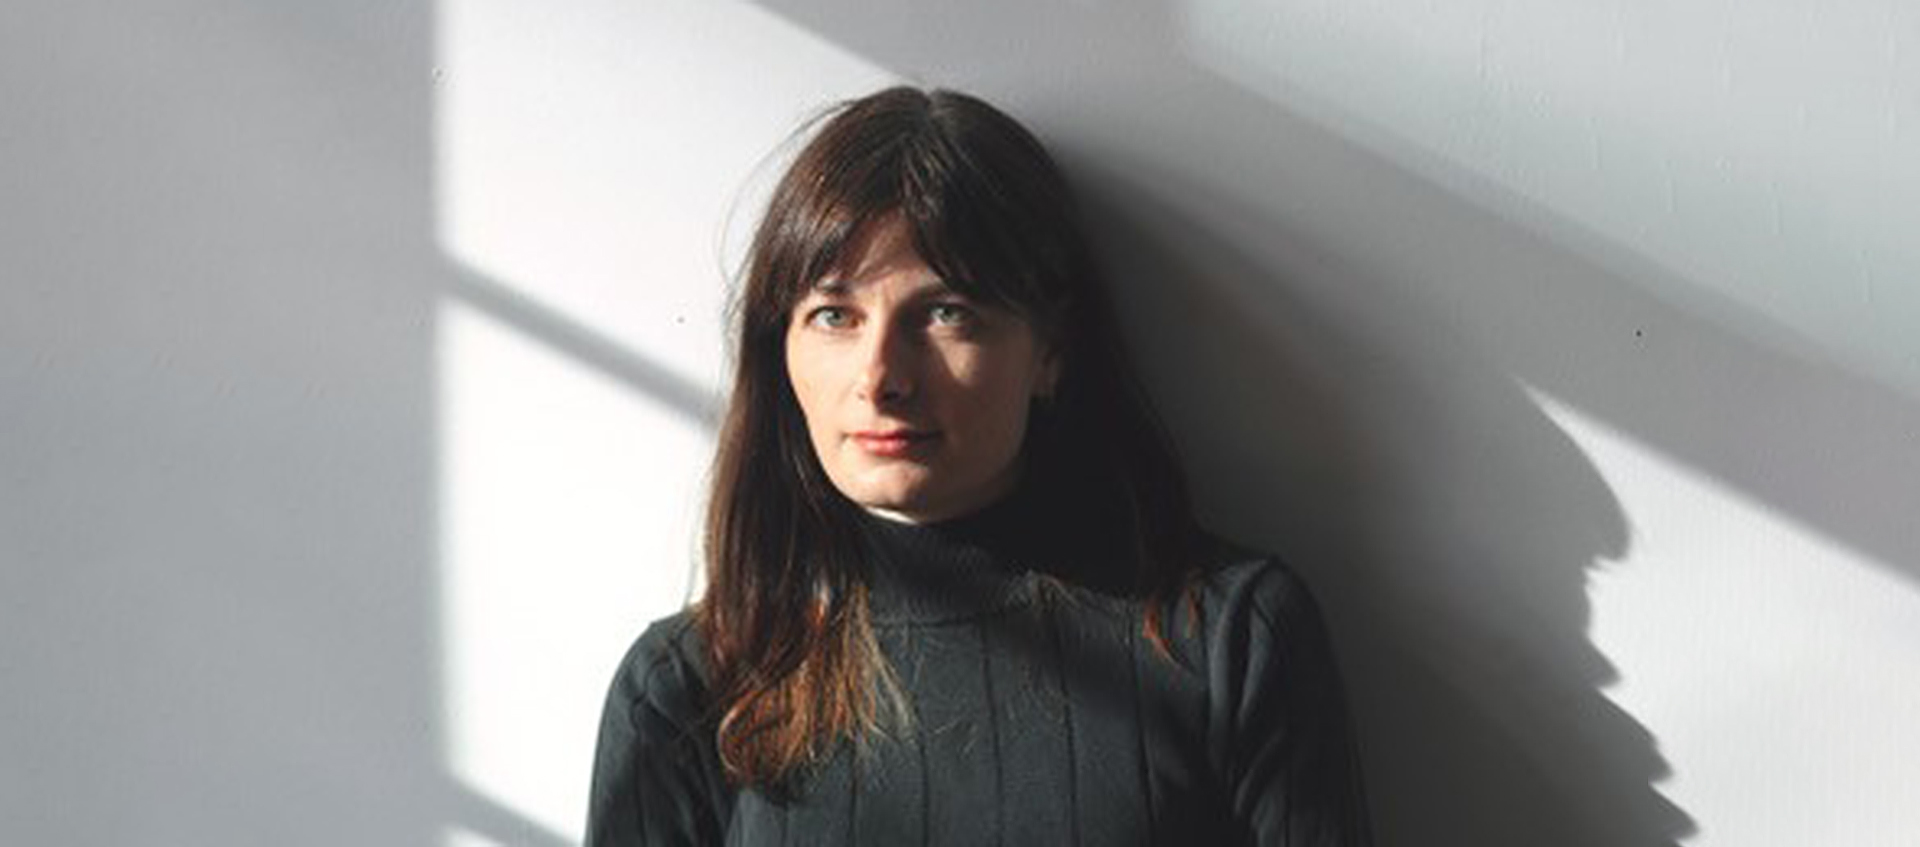 Brett Story, a white woman with light brown hair, sits behind a wooden table in front of a white wall. She is wearing a black turtleneck and the sun streams in through some off-frame windows, creating dynamic shadows and patches of light around her. 